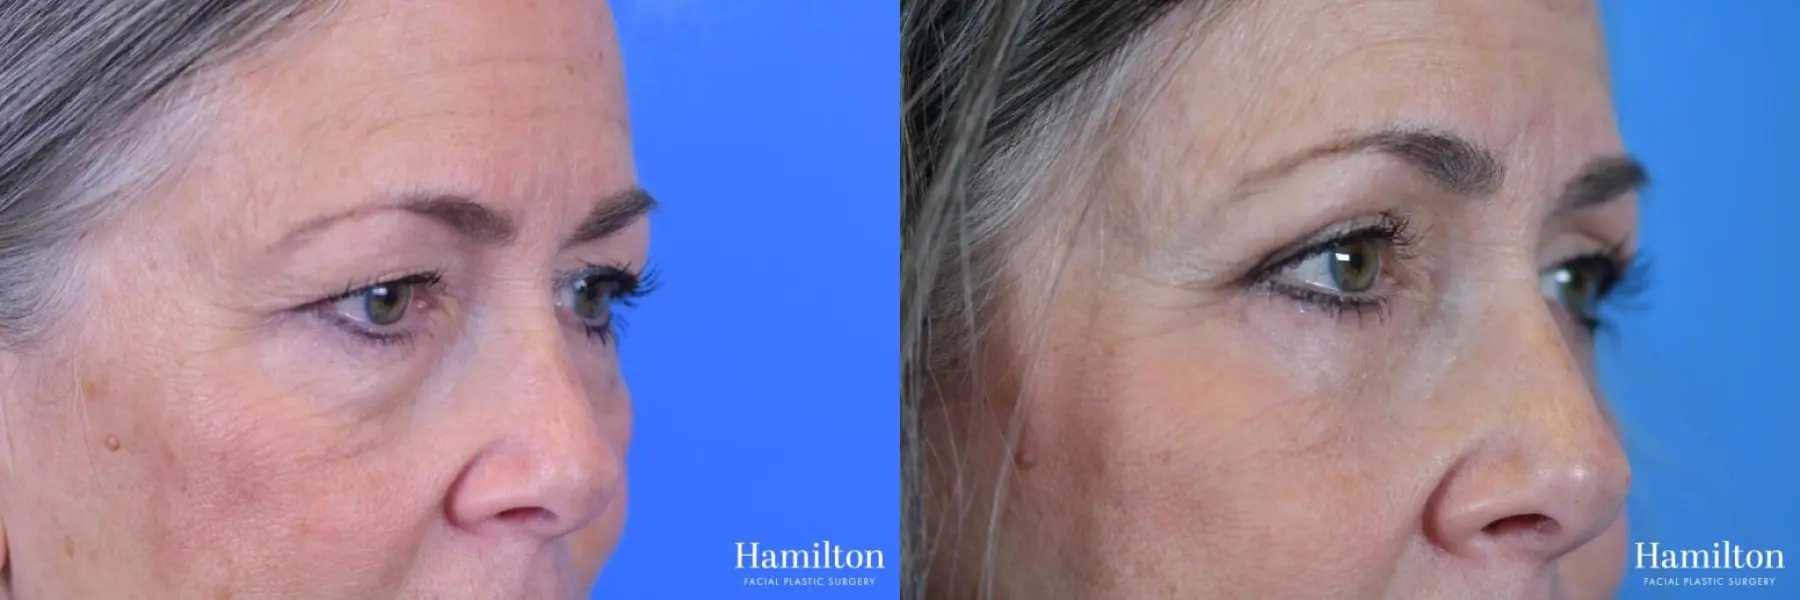 Blepharoplasty: Patient 6 - Before and After 2